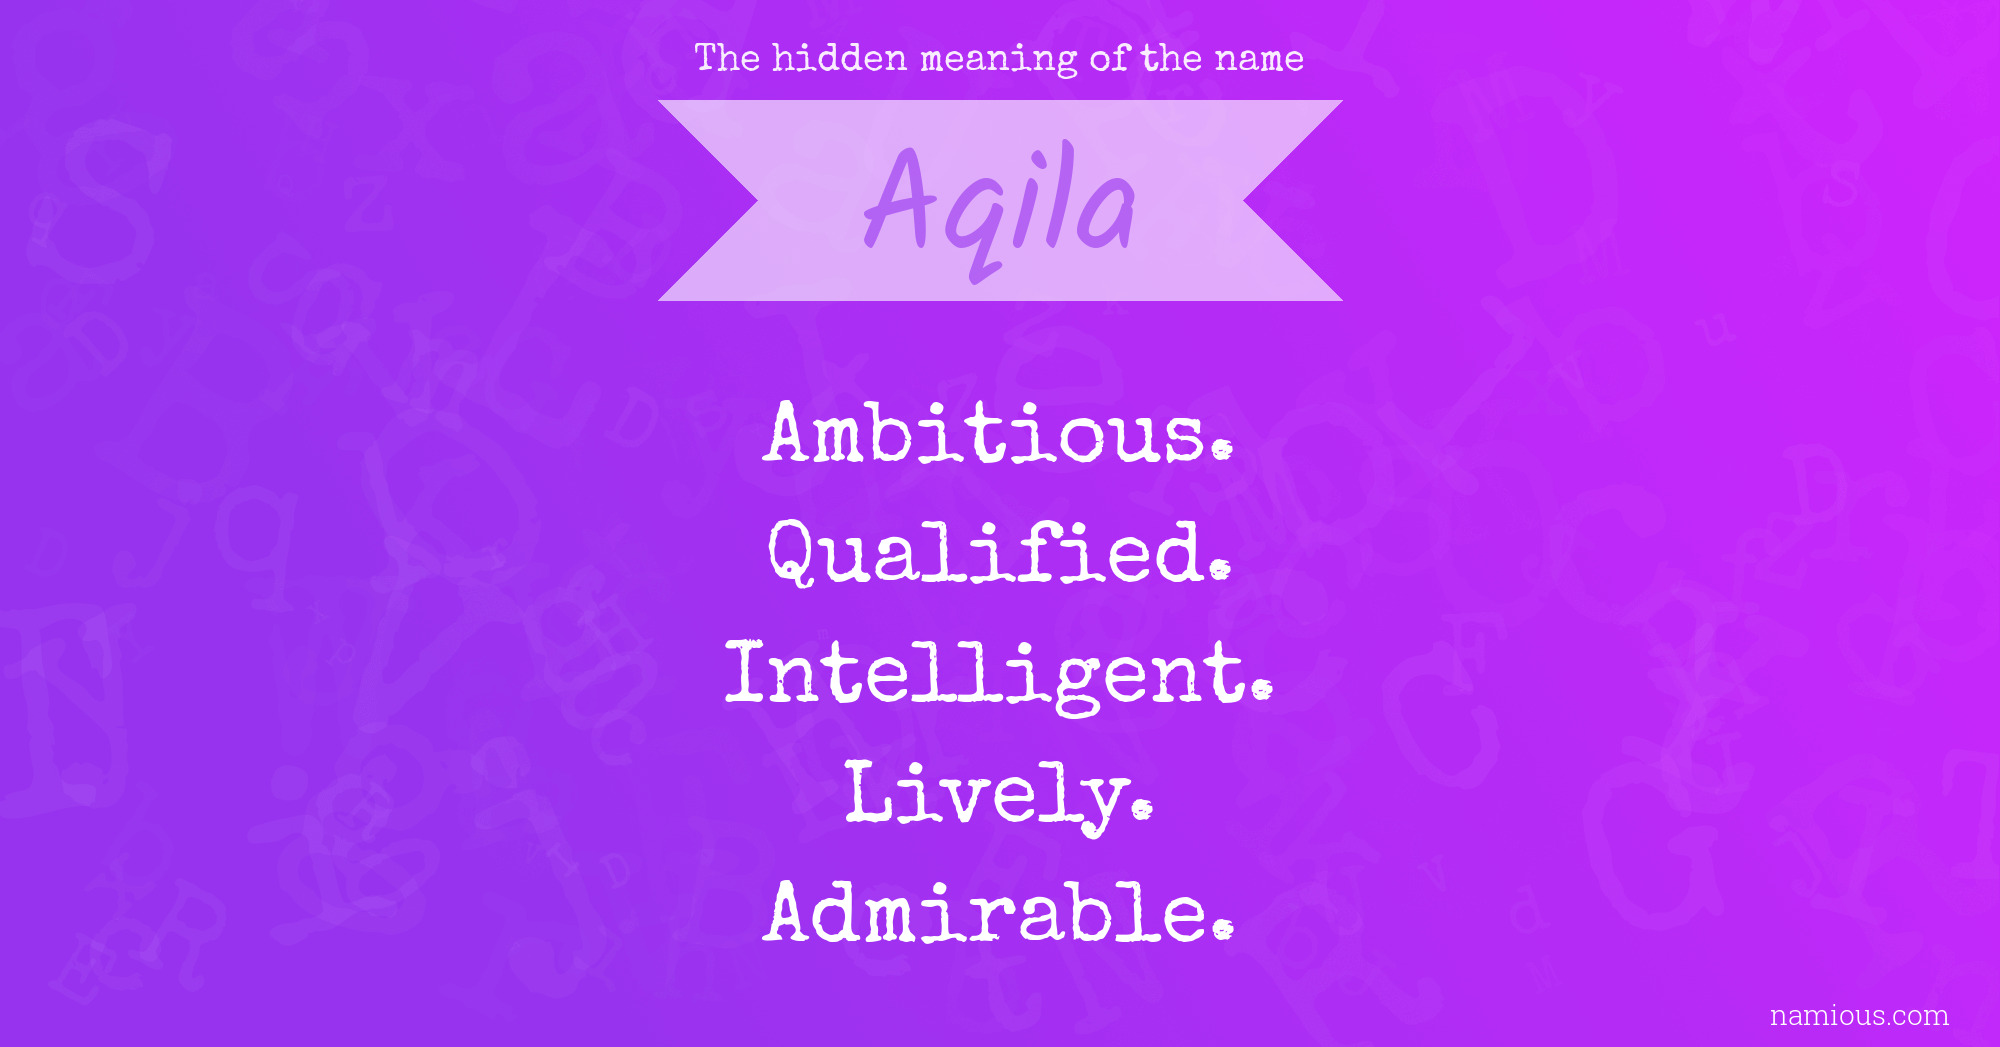 The hidden meaning of the name Aqila